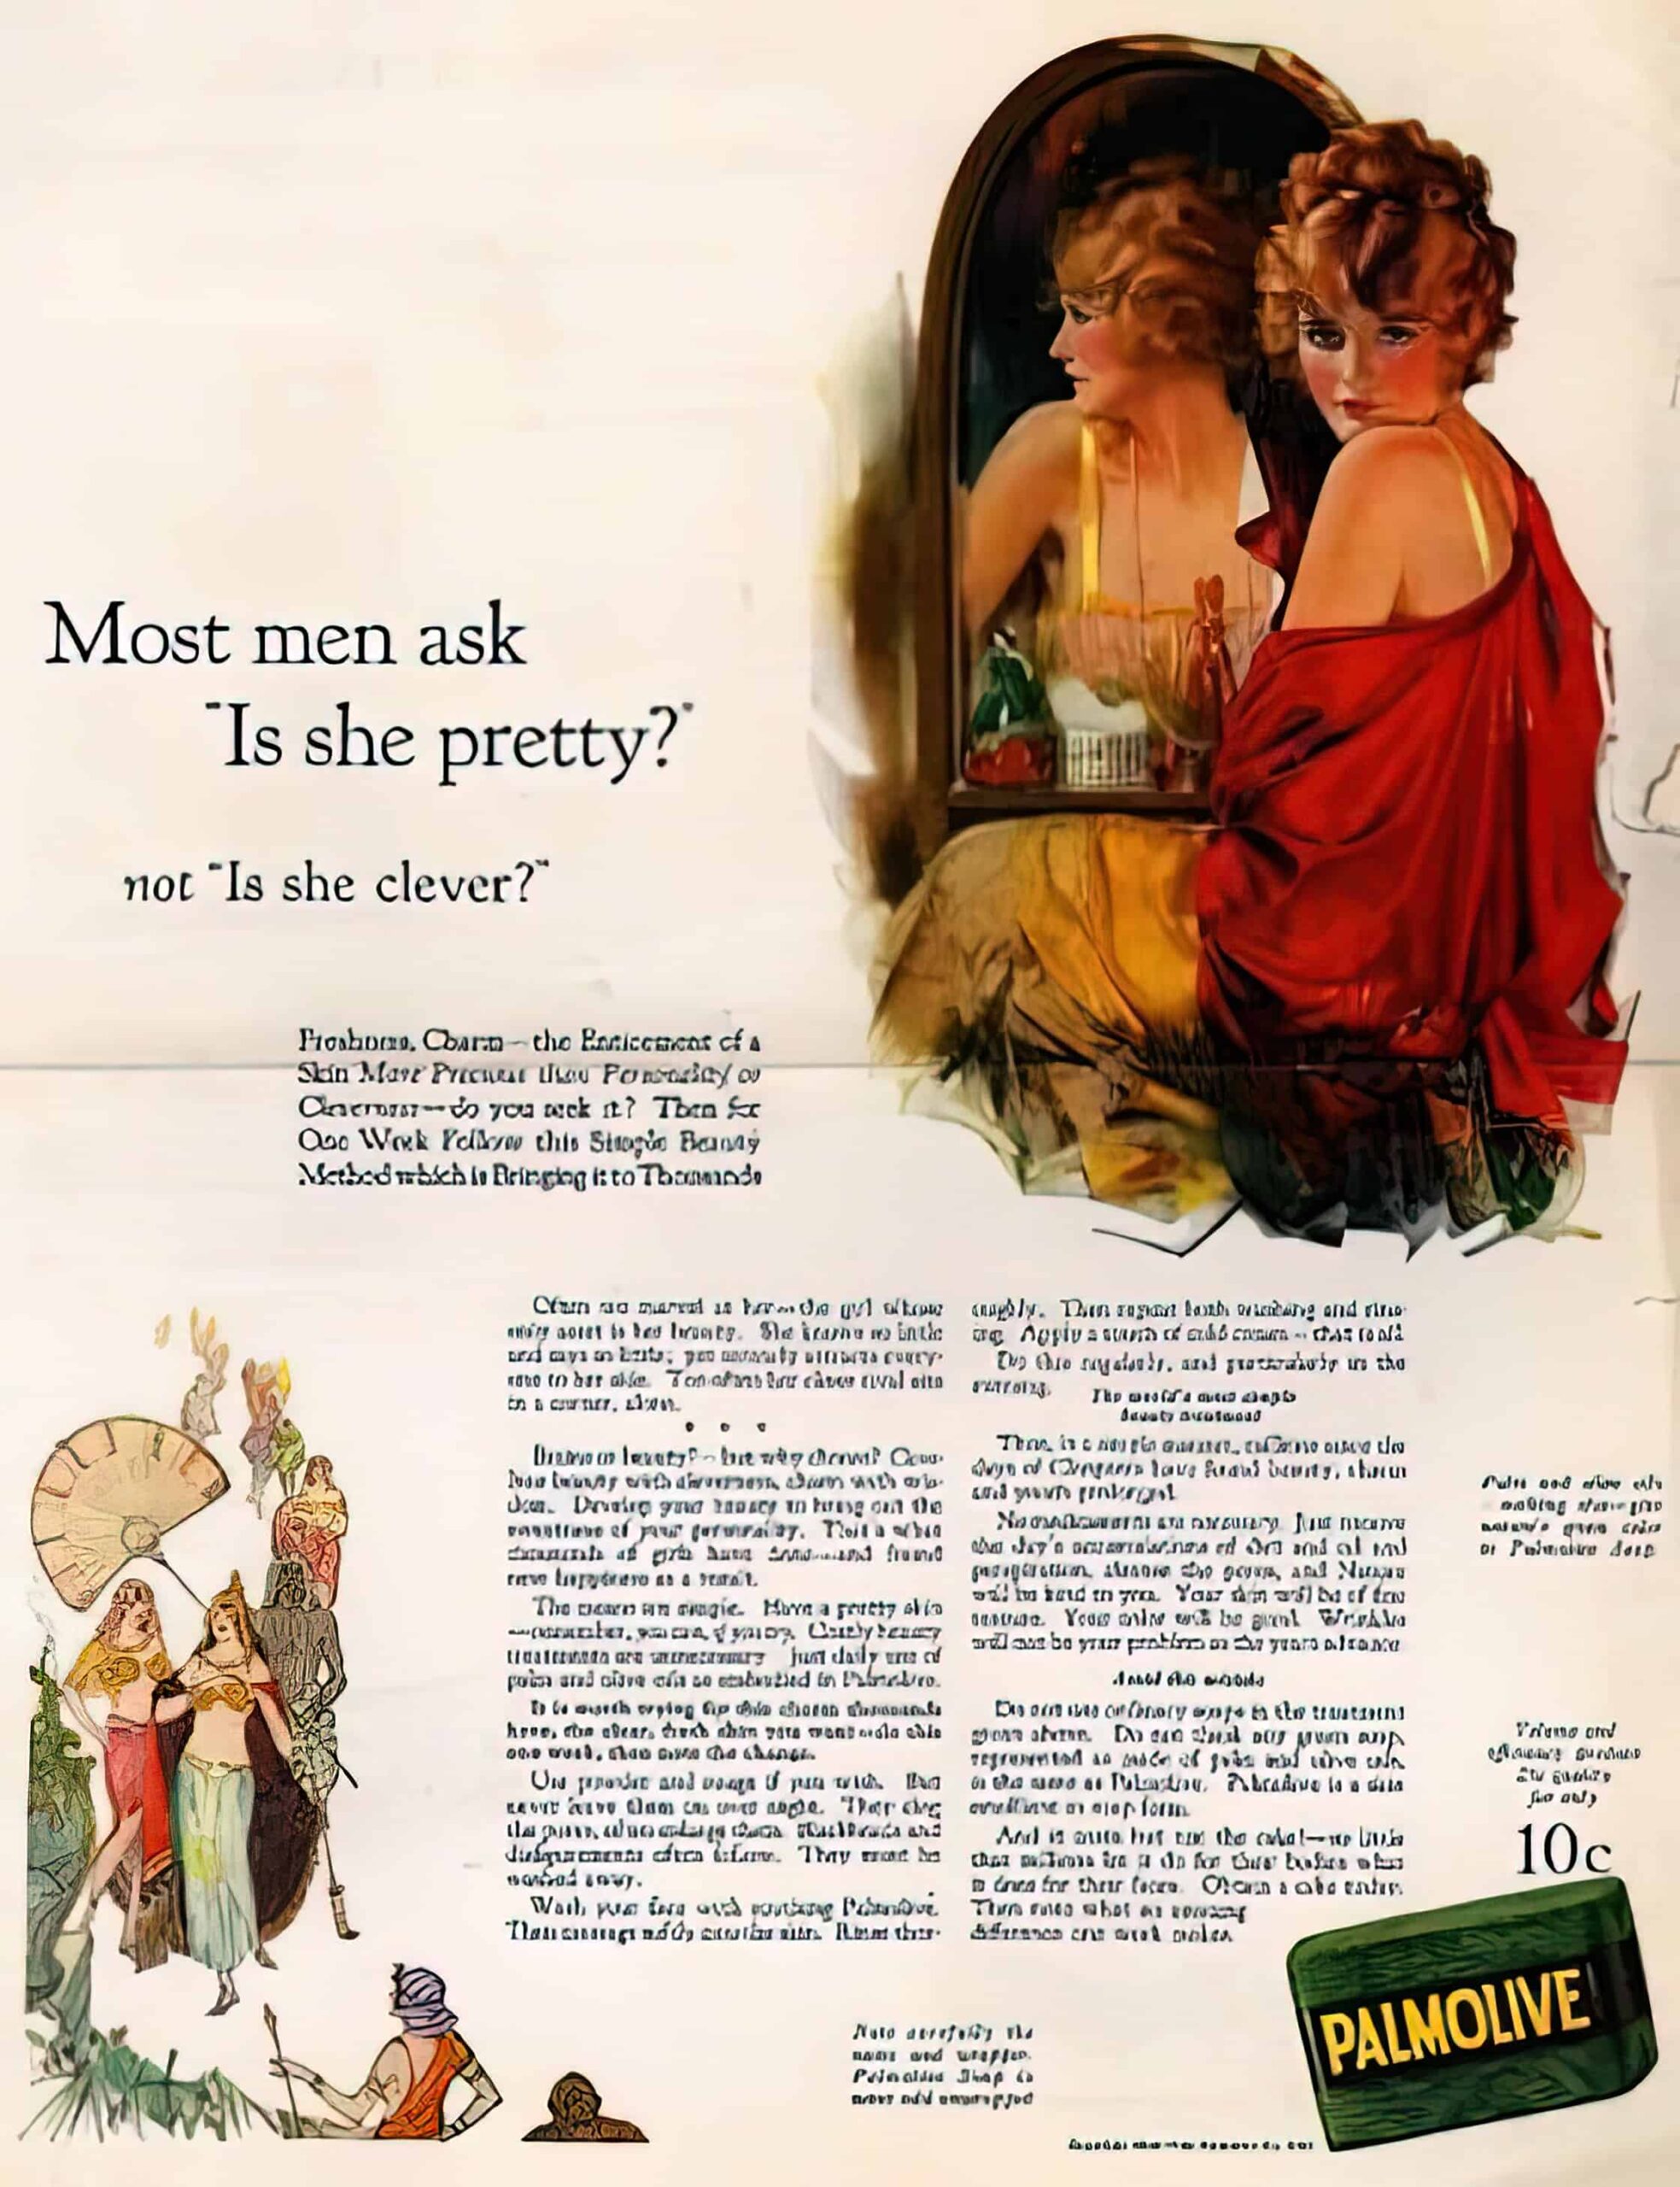 Vintage Sexist Palmolive Ad e1321927242517 scaled